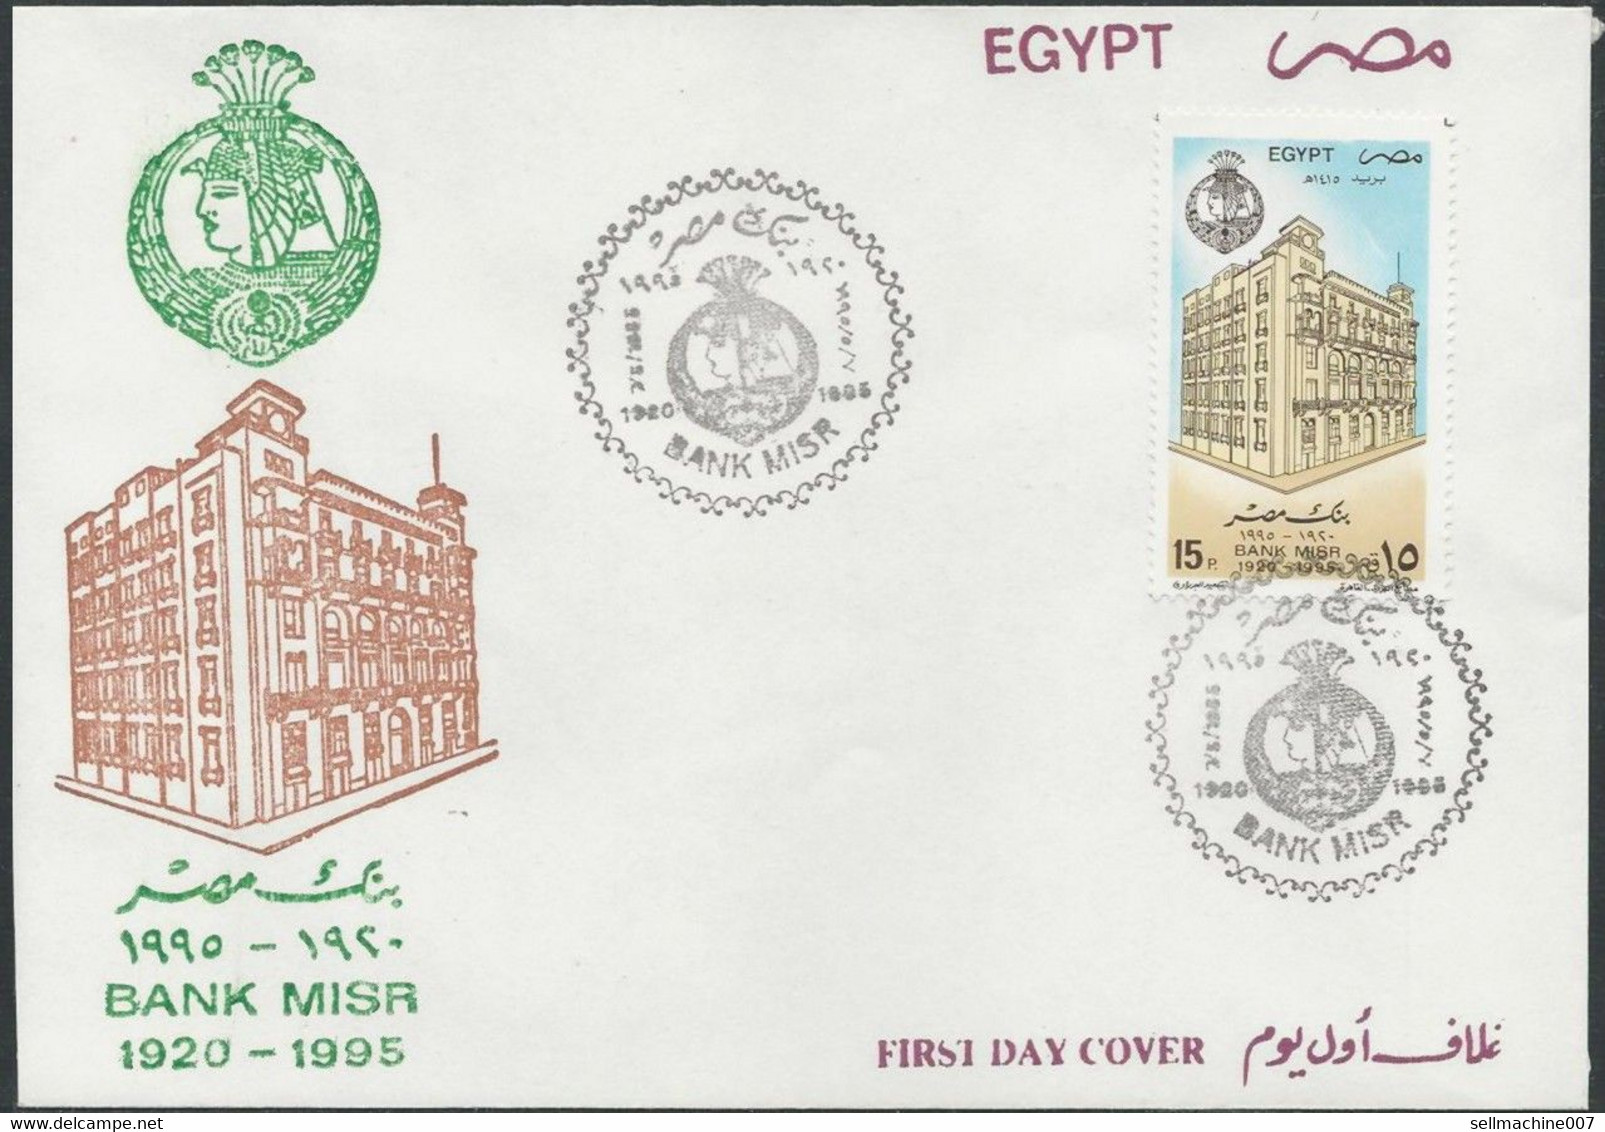 Egypt 1995 First Day Cover - FDC Bank Misr 75 Years Anniversary 1920-1995 - Covers & Documents